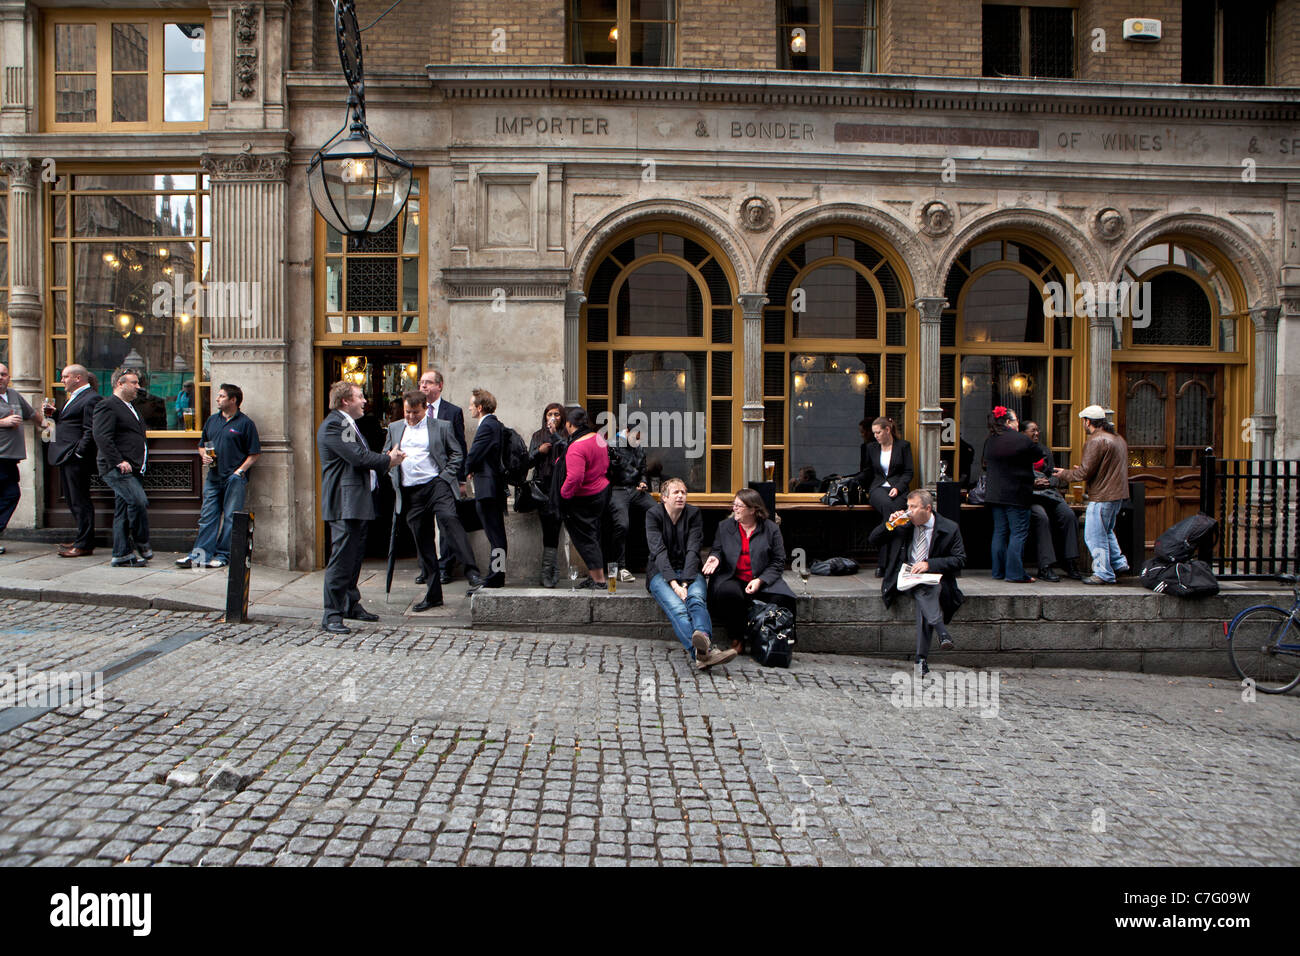 People in front of bar in London, England Stock Photo